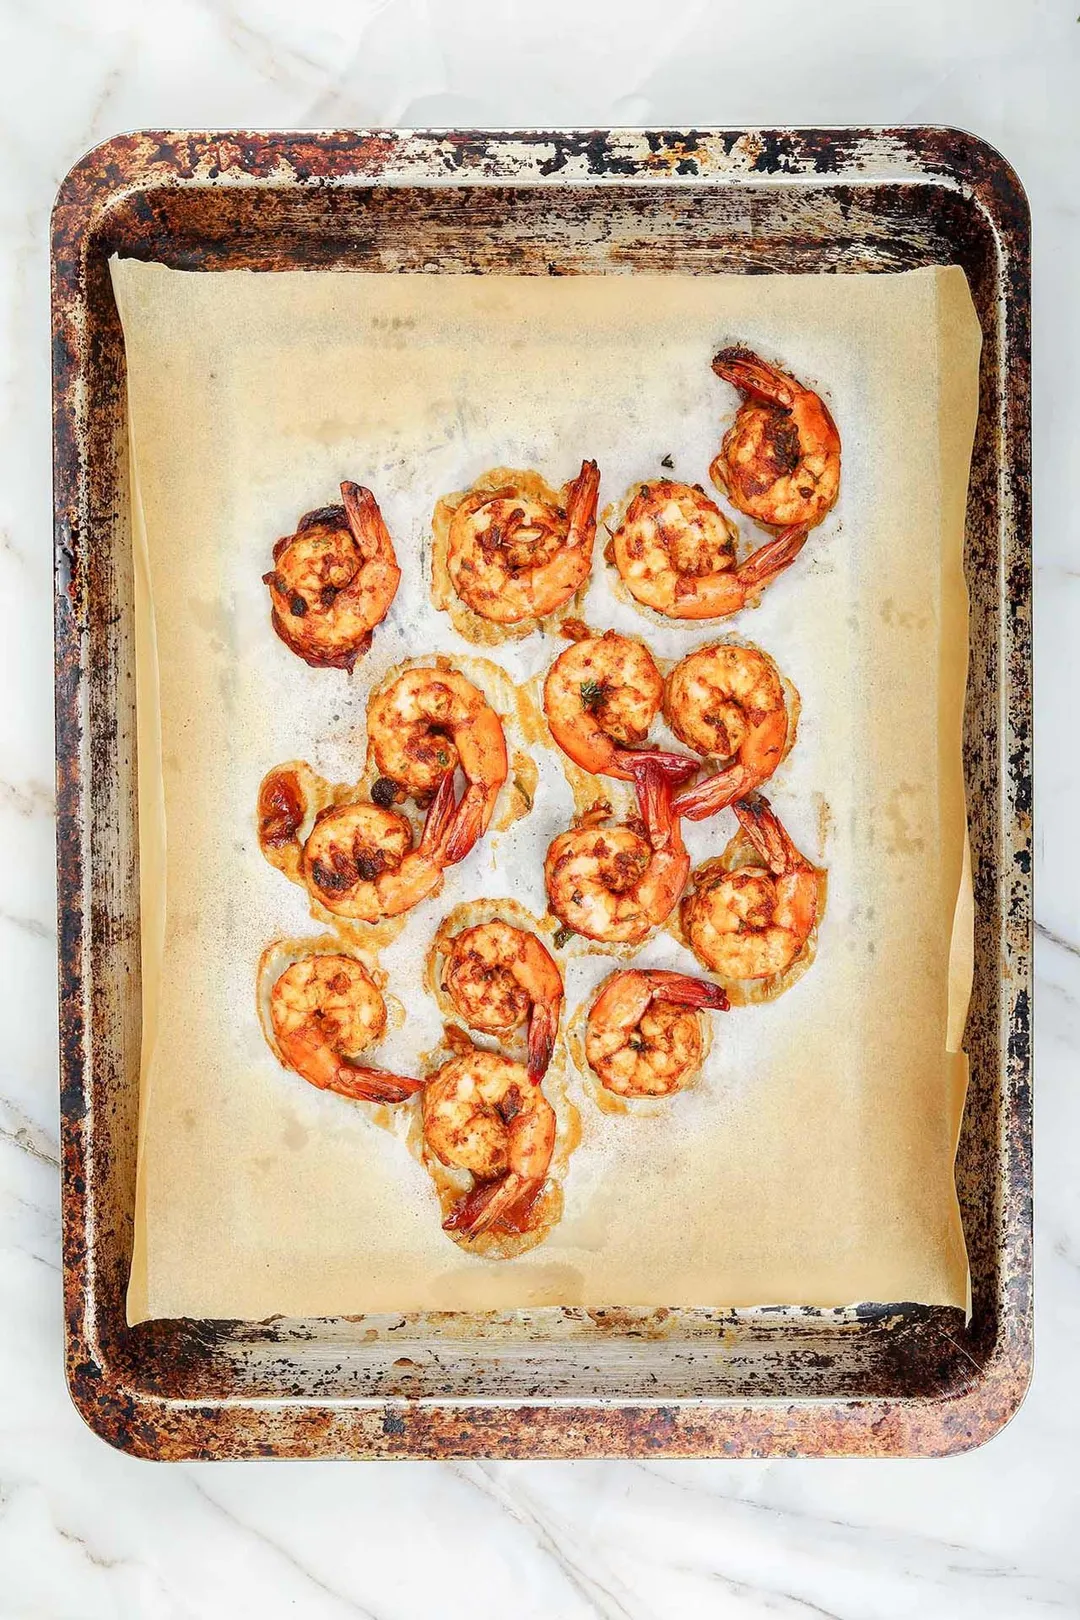 How Long to Grill Shrimp